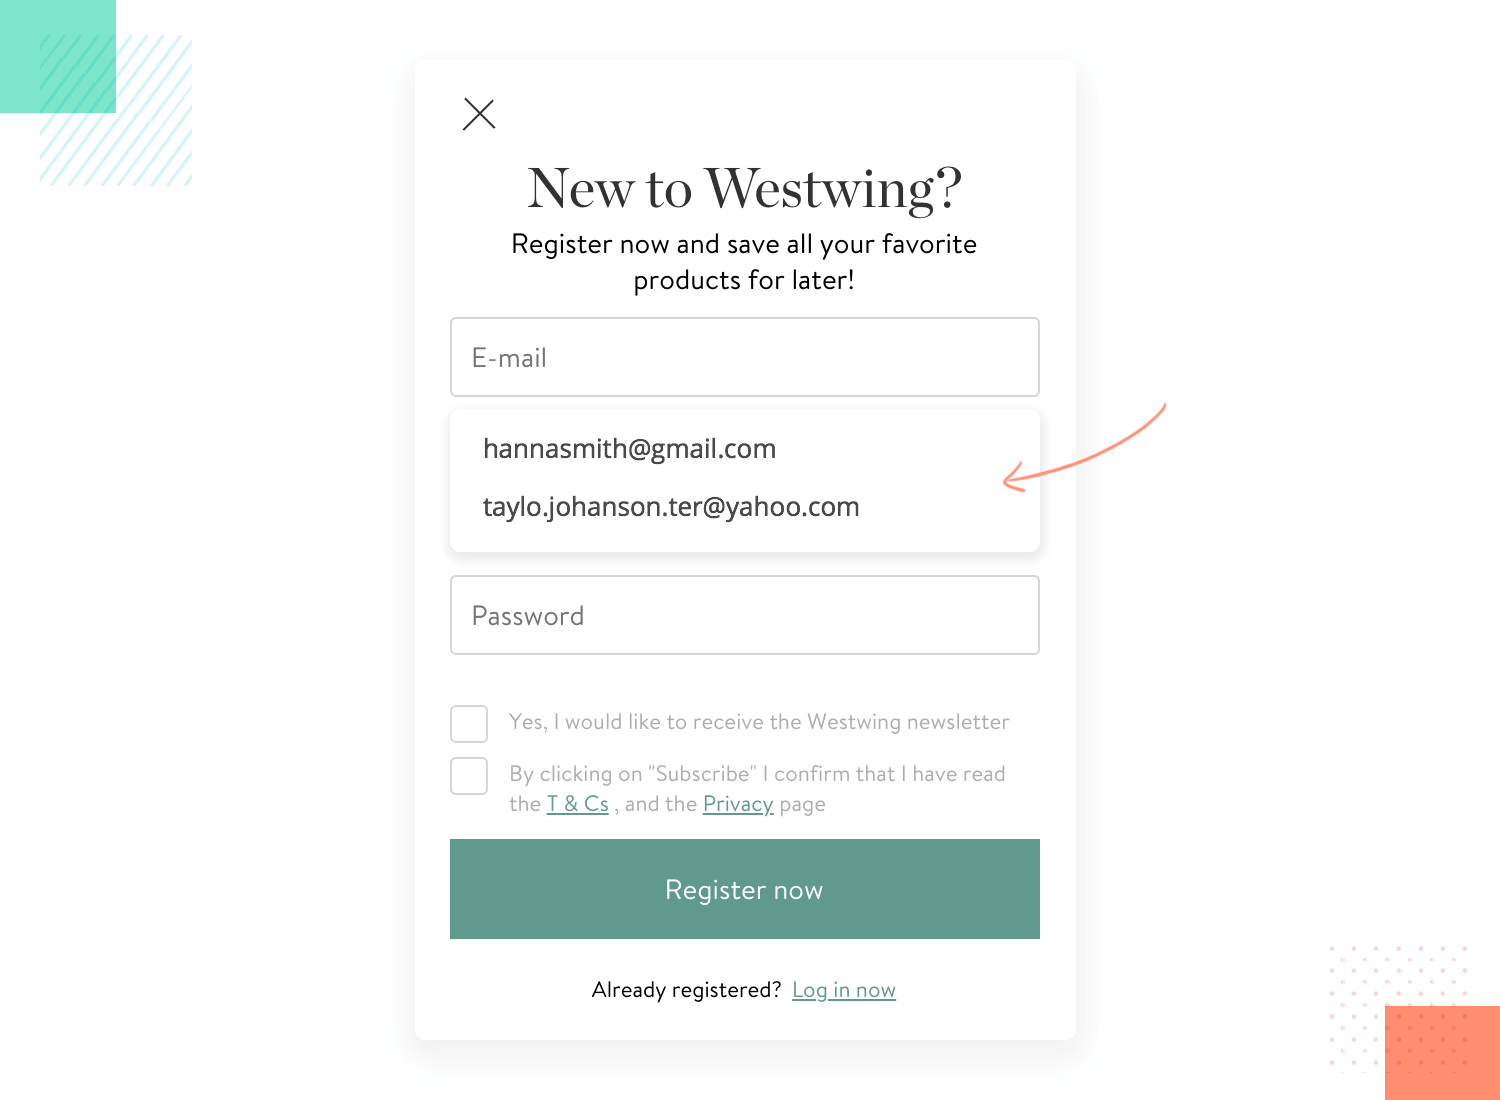 example of great form design by westwting